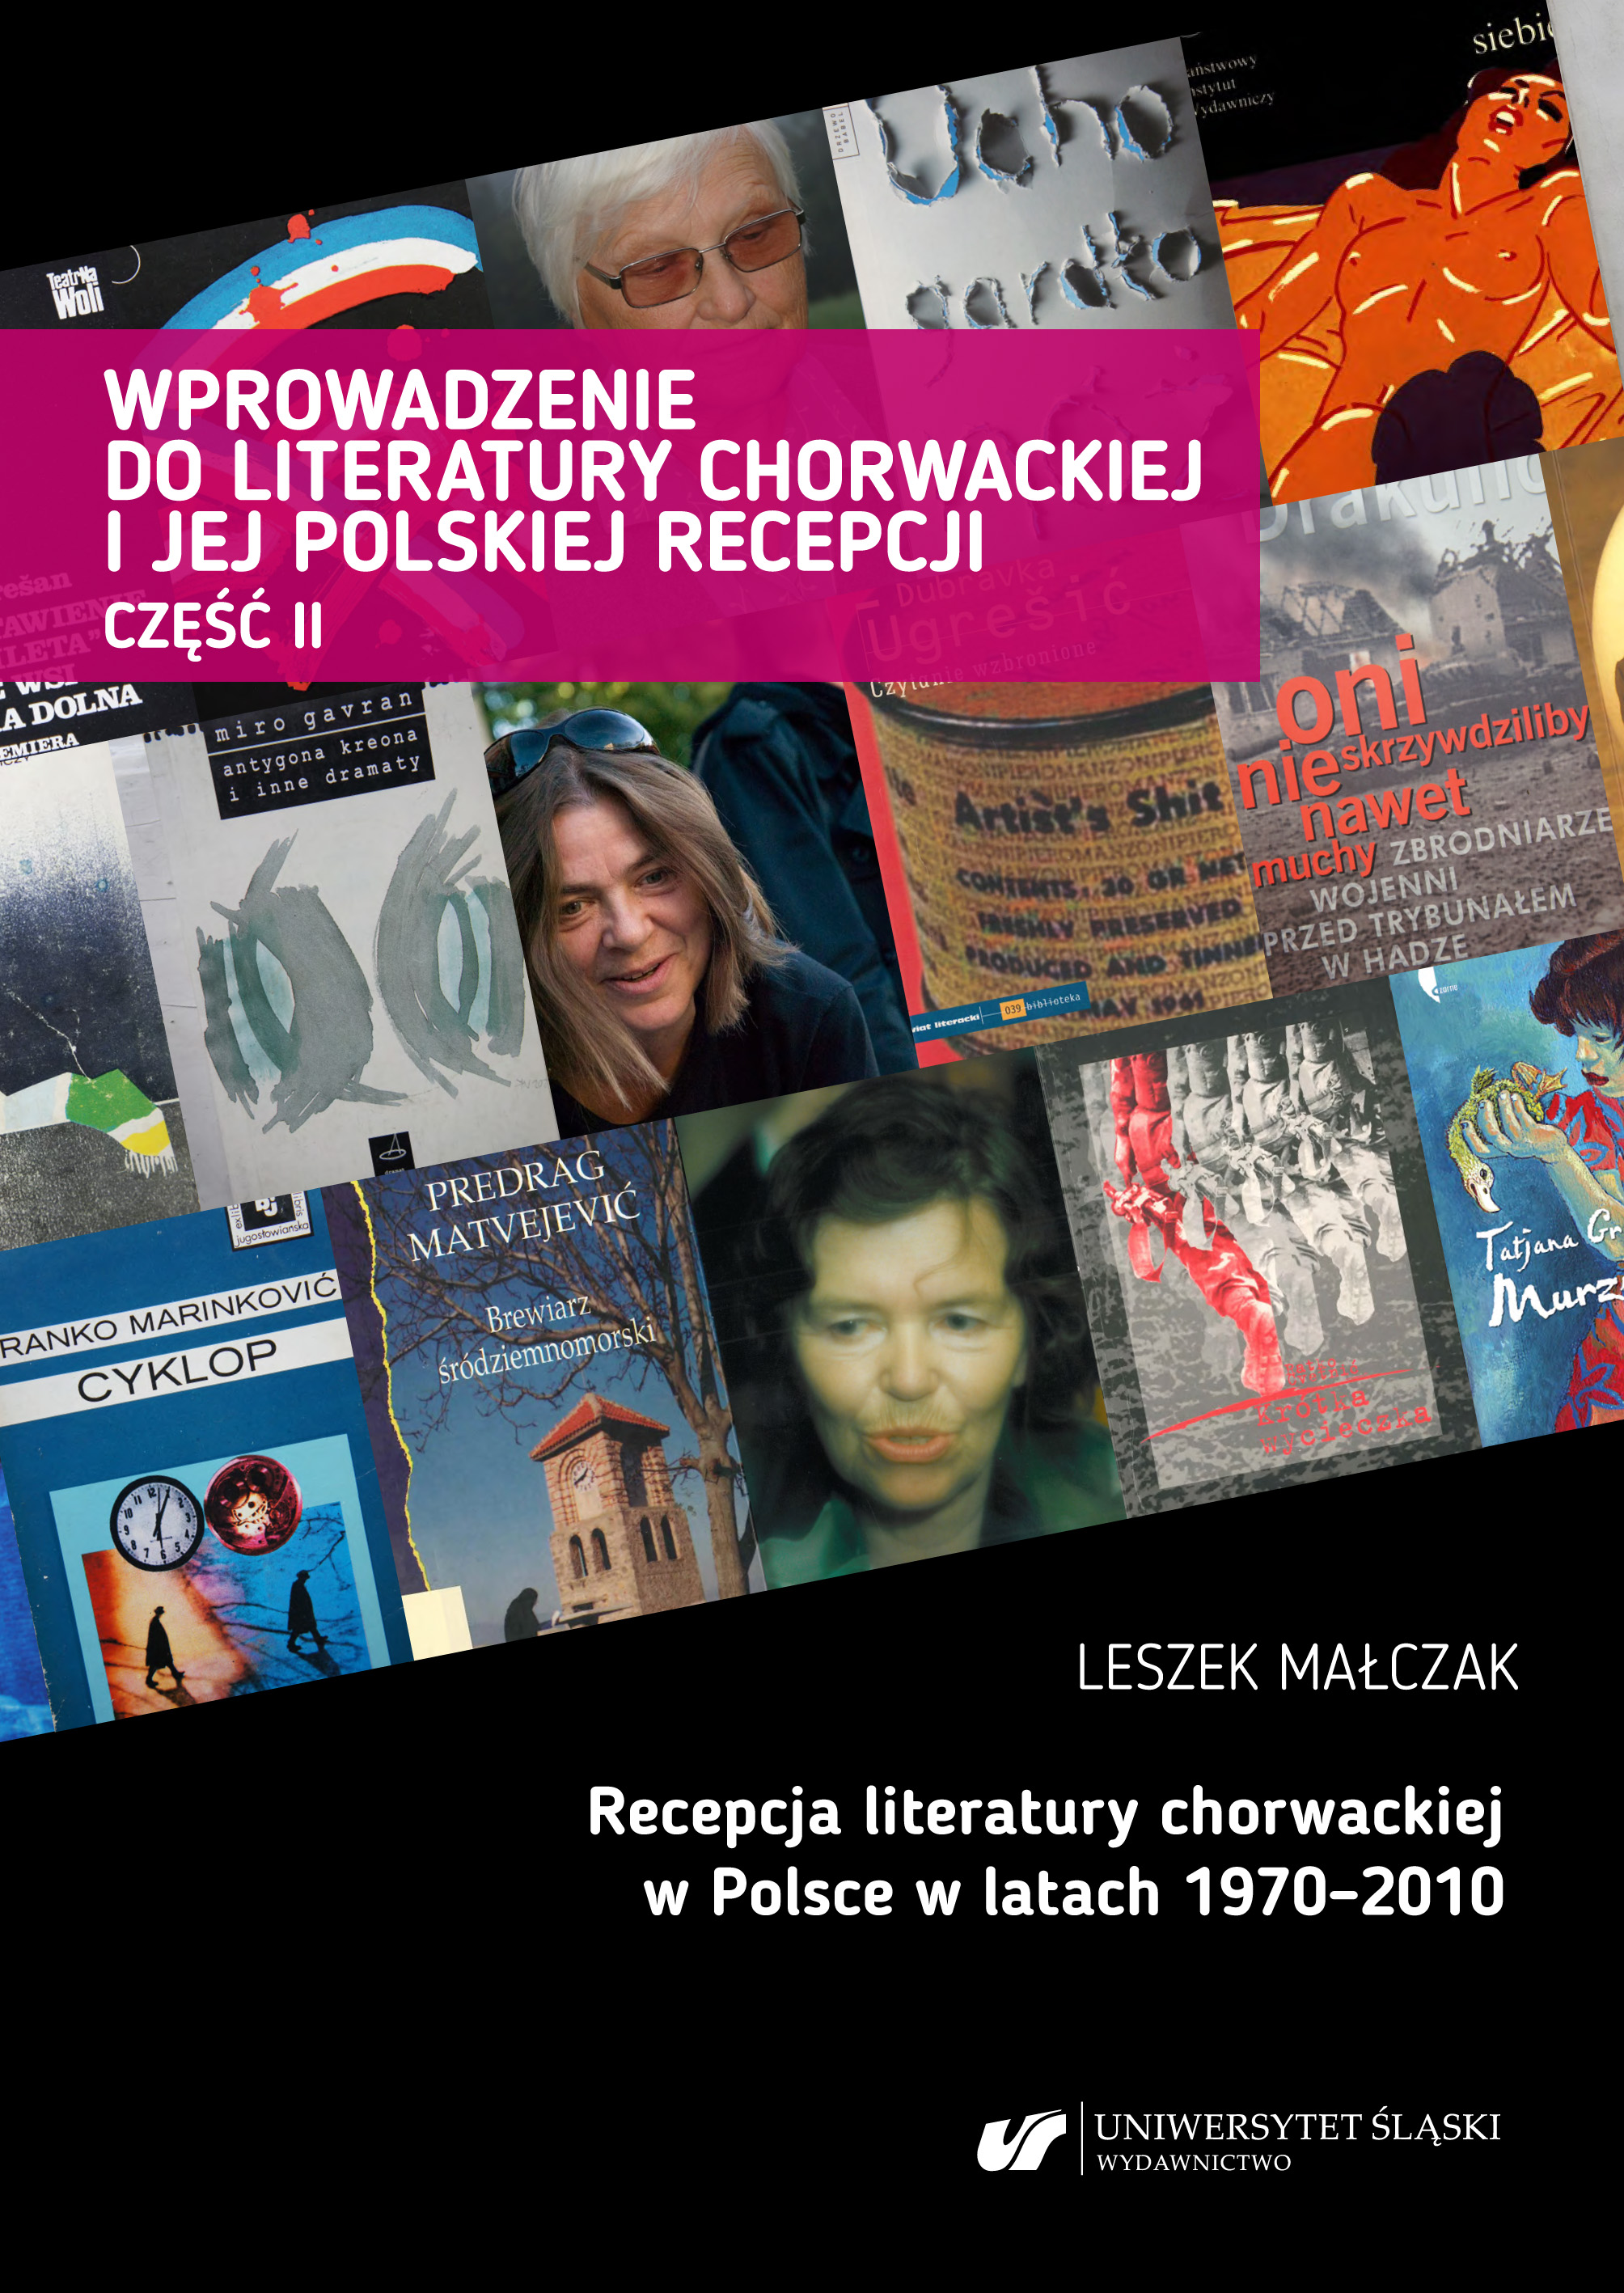 Introduction to Croatian Literature and Its Polish Reception. Part 2: The Reception of Croatian Literature in Poland 1970–2010